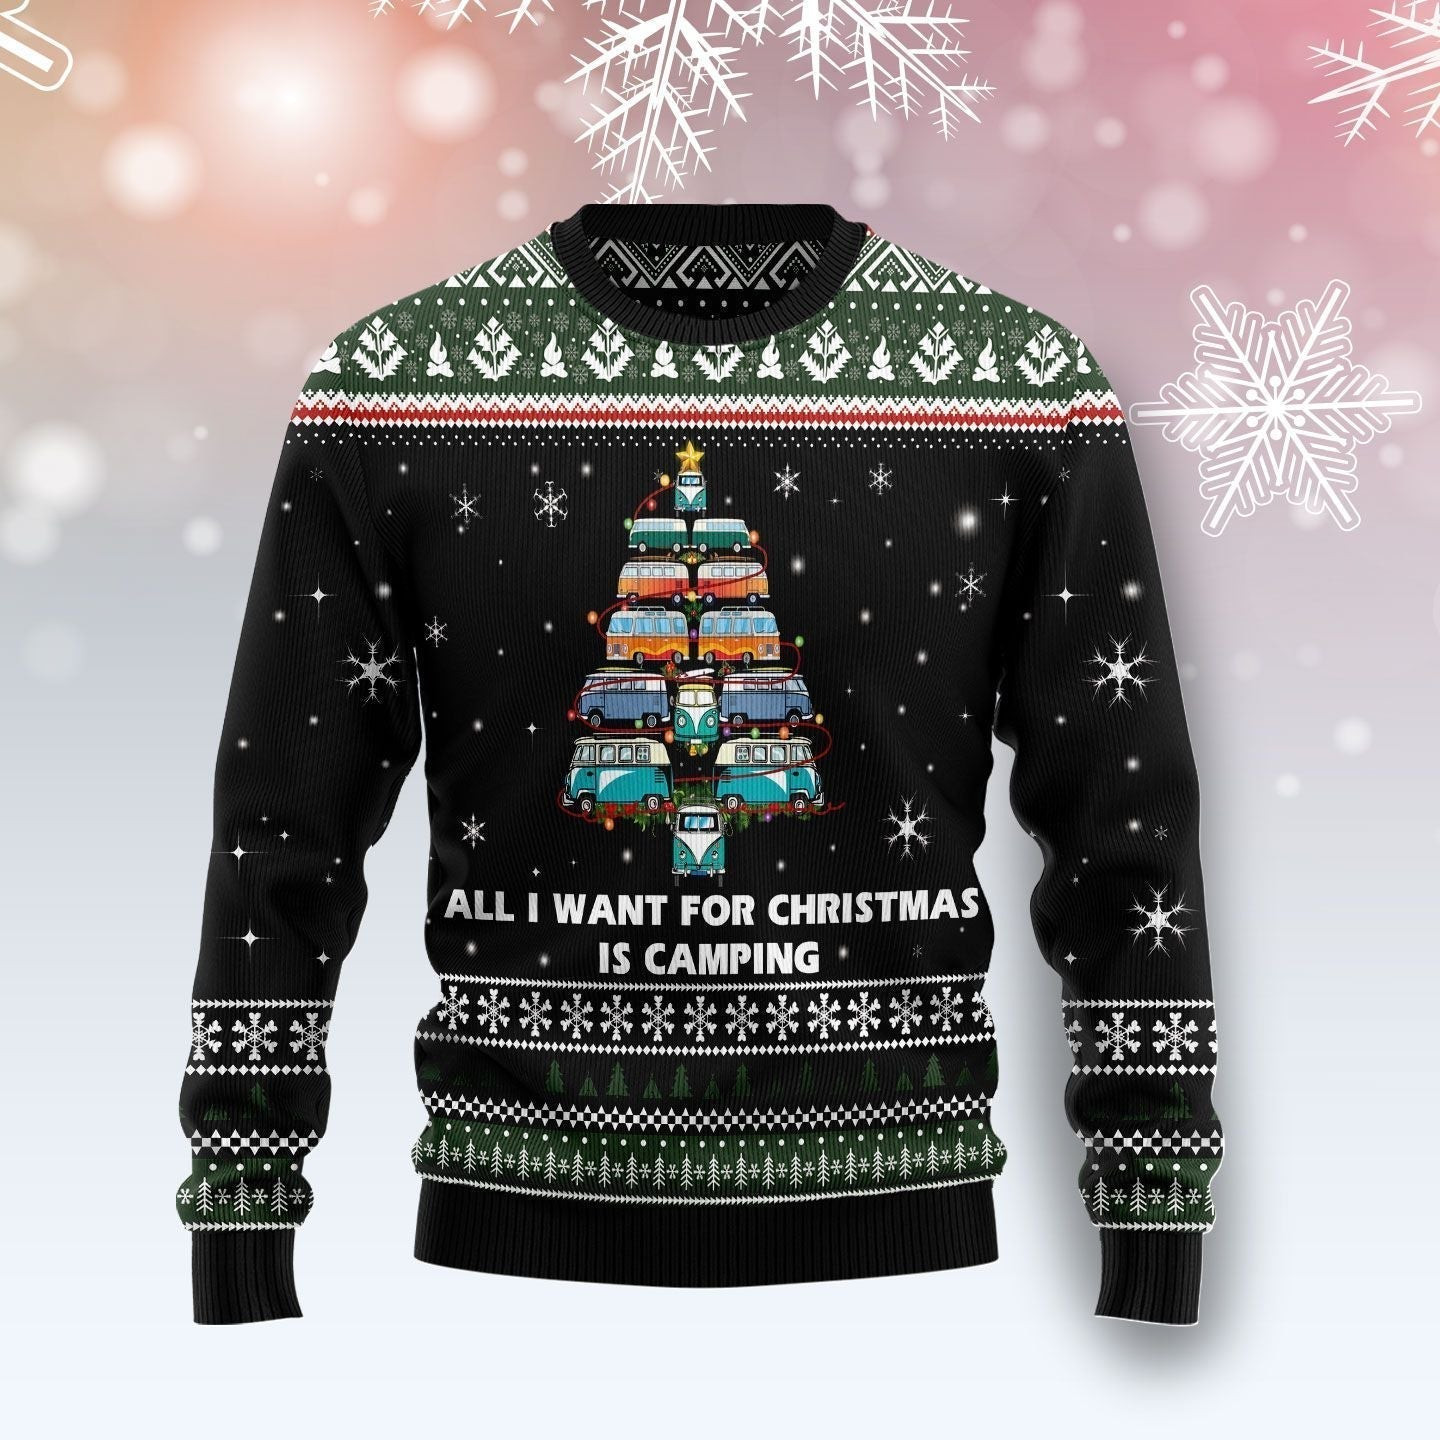 All I Want For Christmas Is Camping Ugly Christmas Sweater Ugly Sweater For Men Women